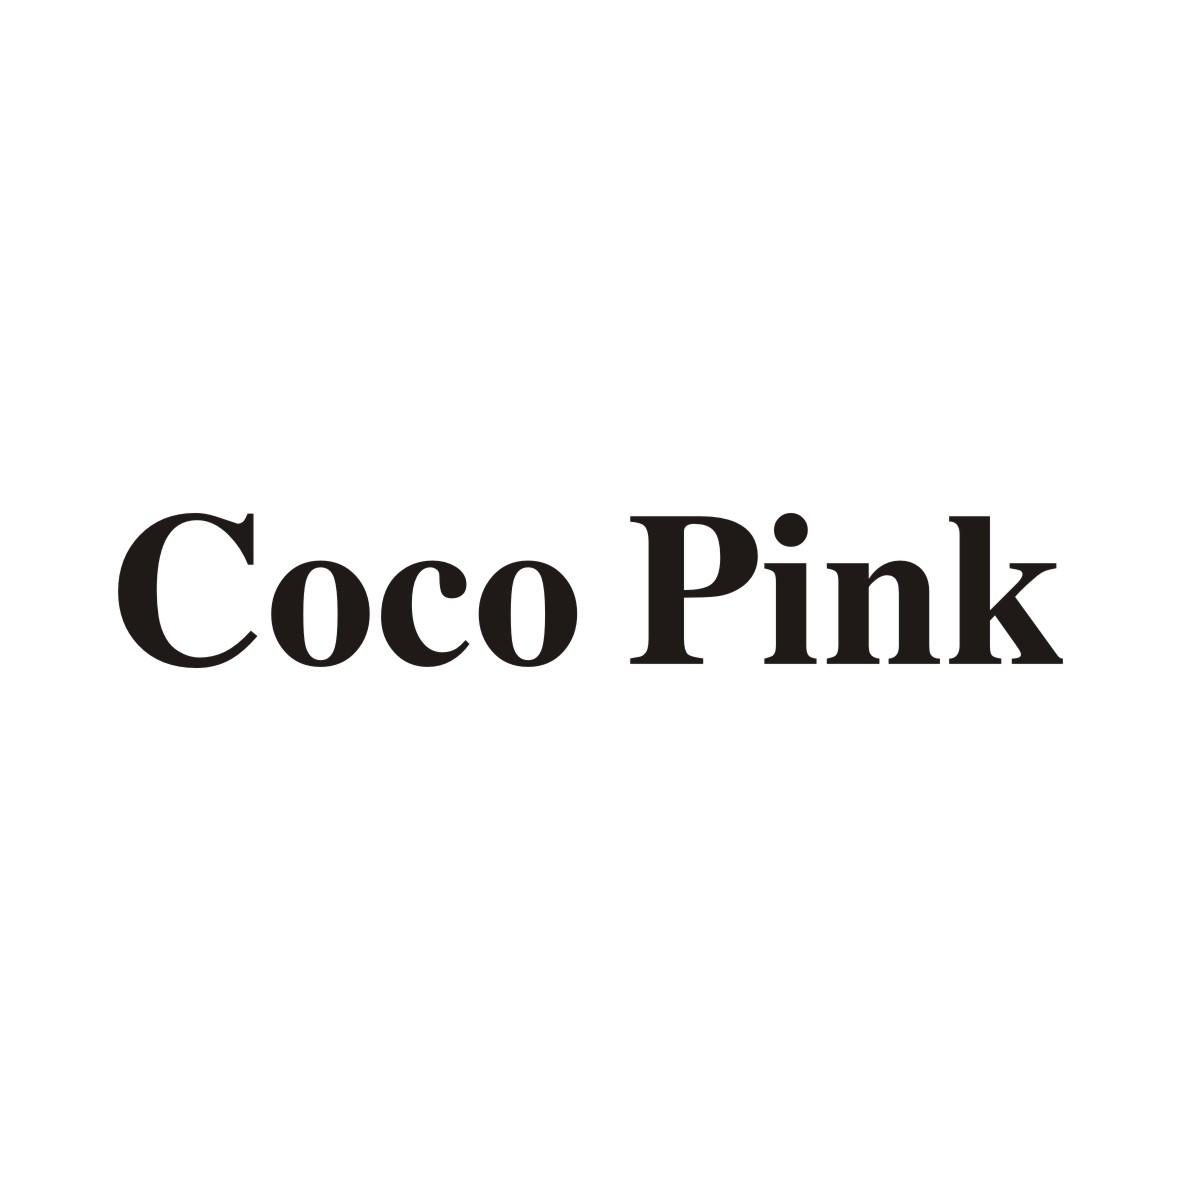 COCO PINK